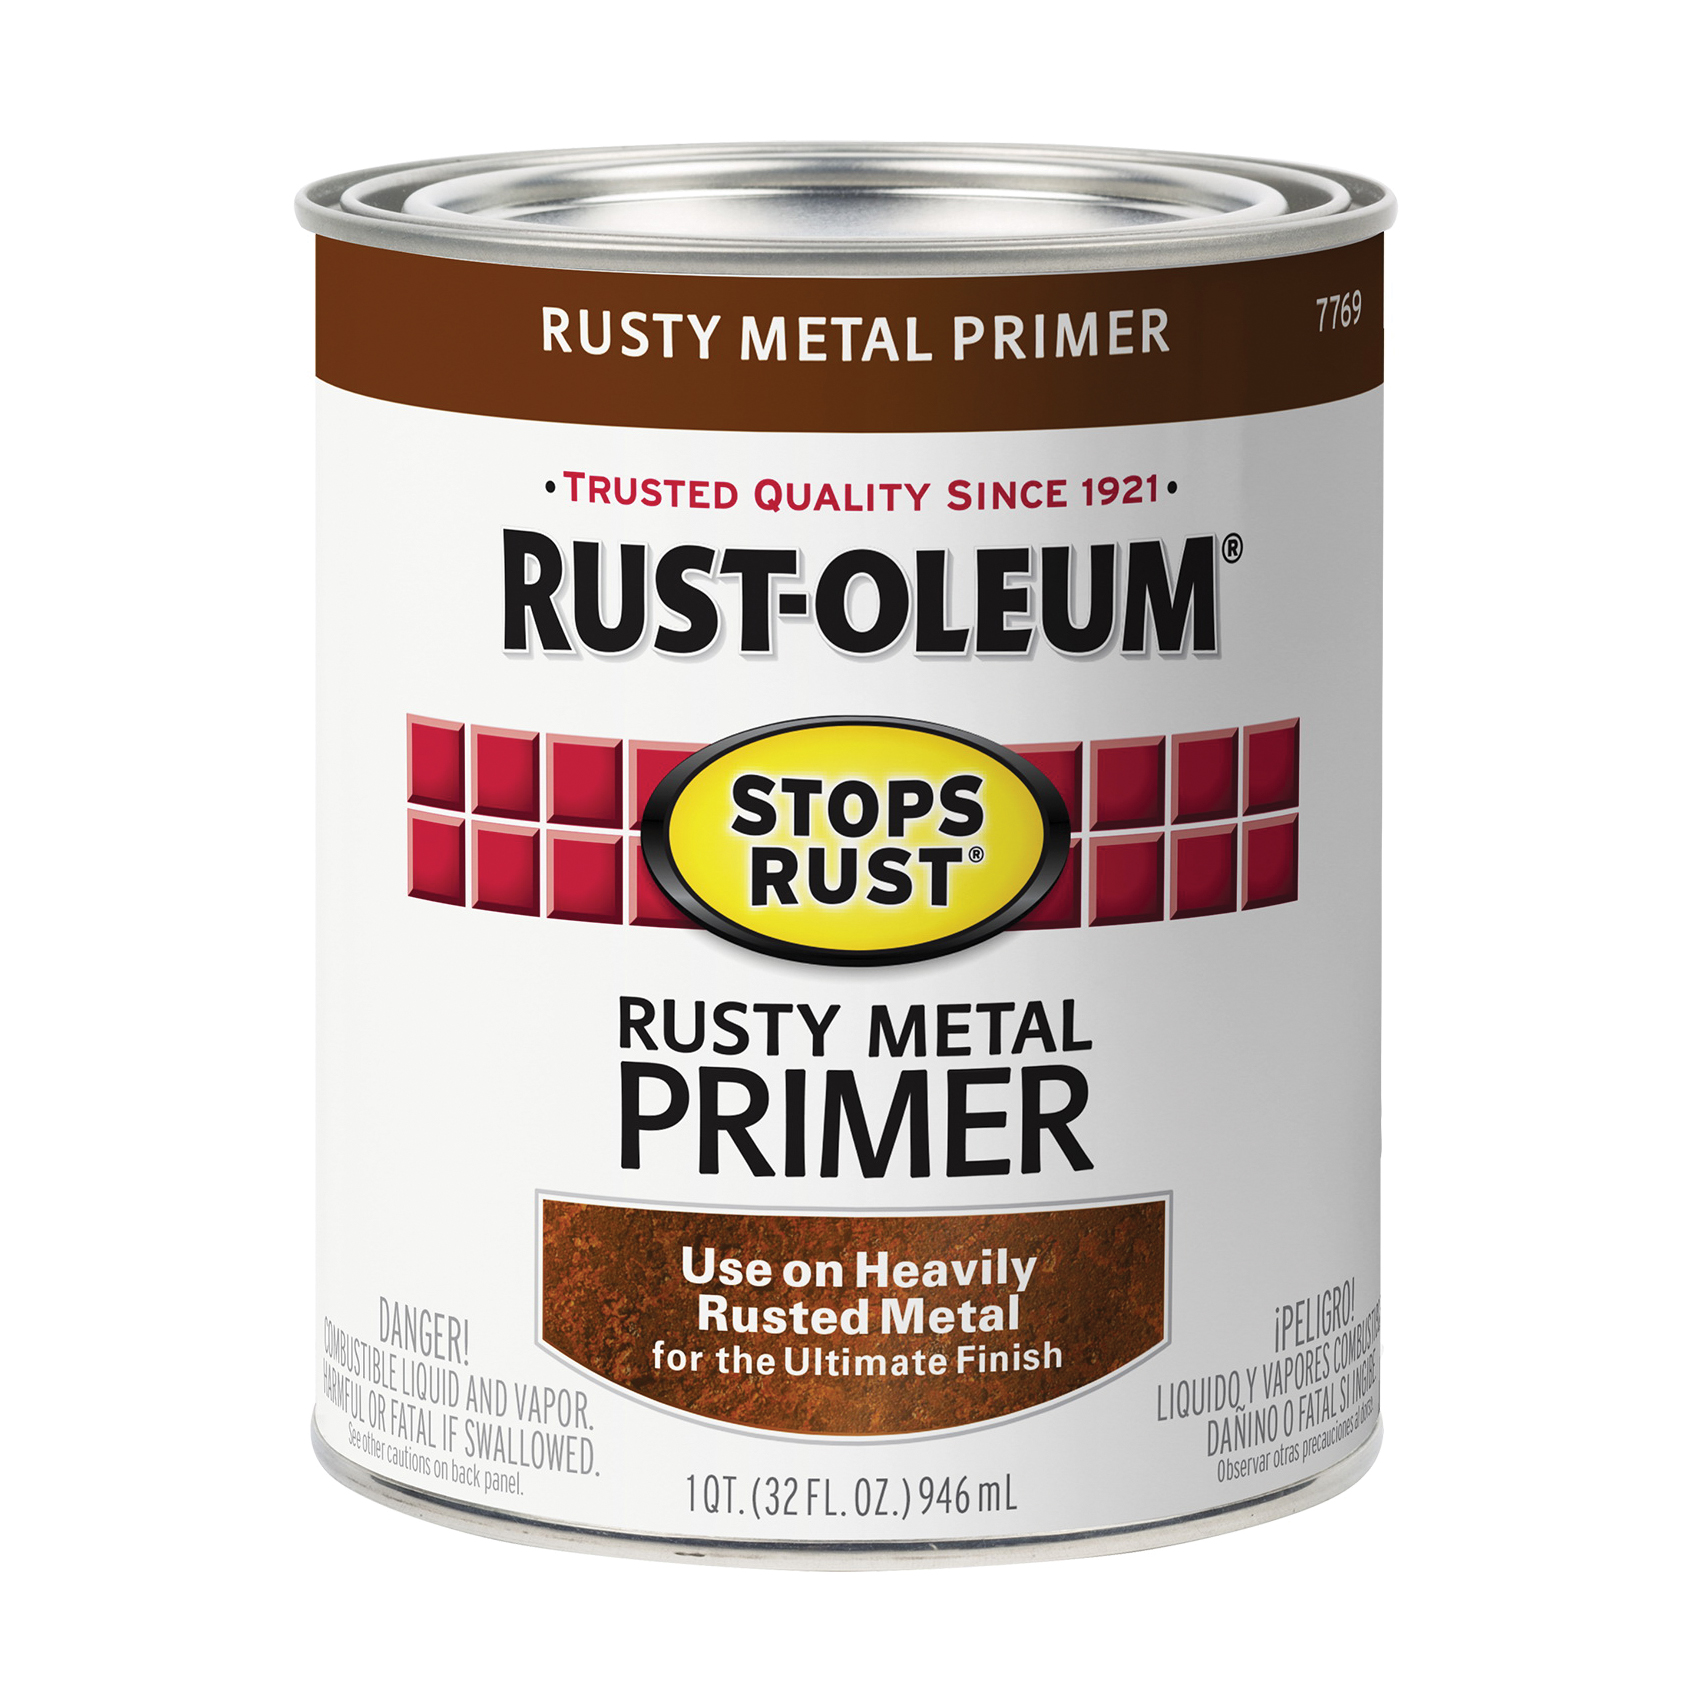 State rust prime фото 102